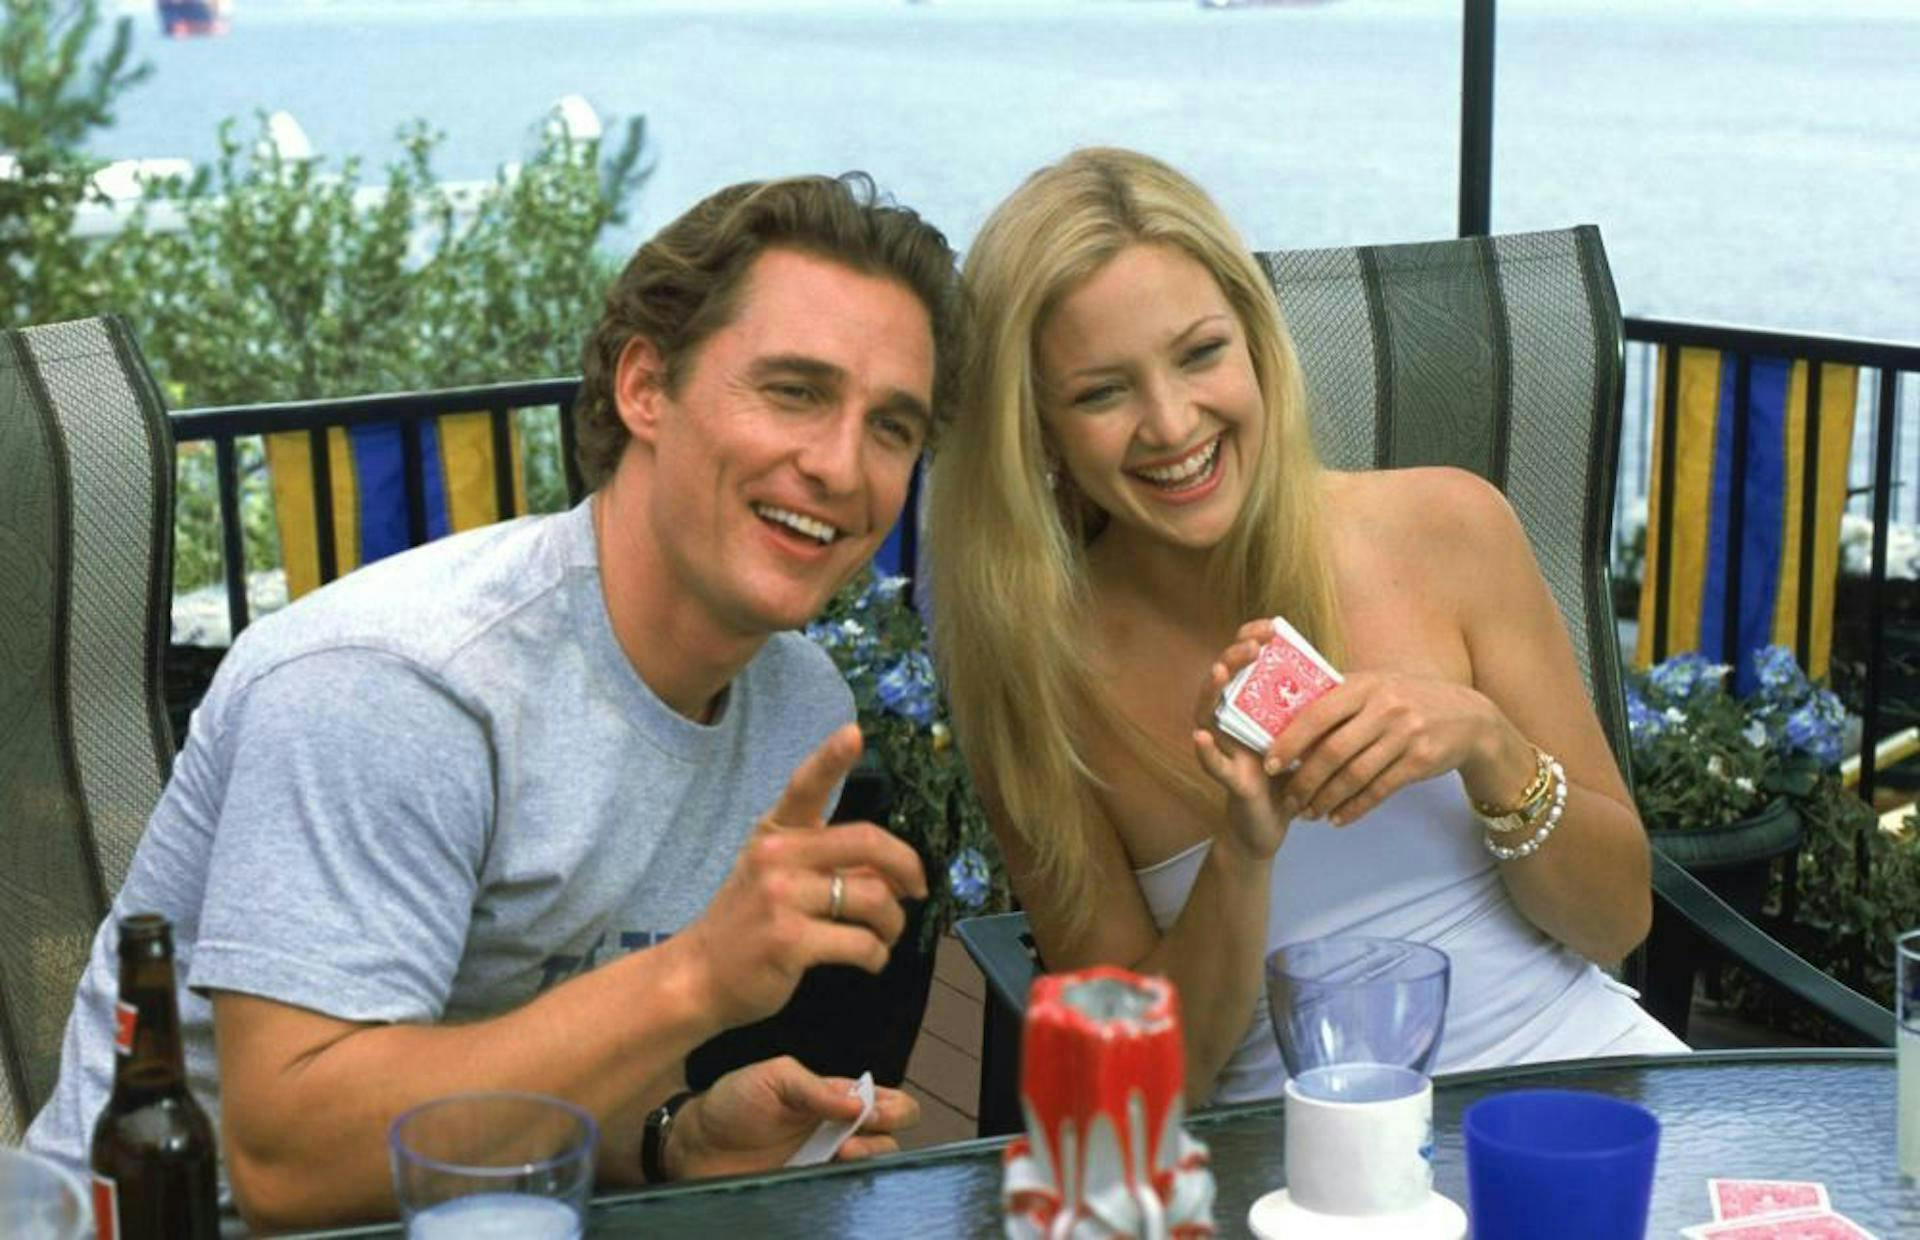 blssi.com_project_id=27626 blssi.com_person_id=28513 blssi.com_person_id=29552 2000s movies 2003 movies card game cards deck hudson,kate laughing m-feb03 mcconaughey,matthew movies playing cards person human beverage drink